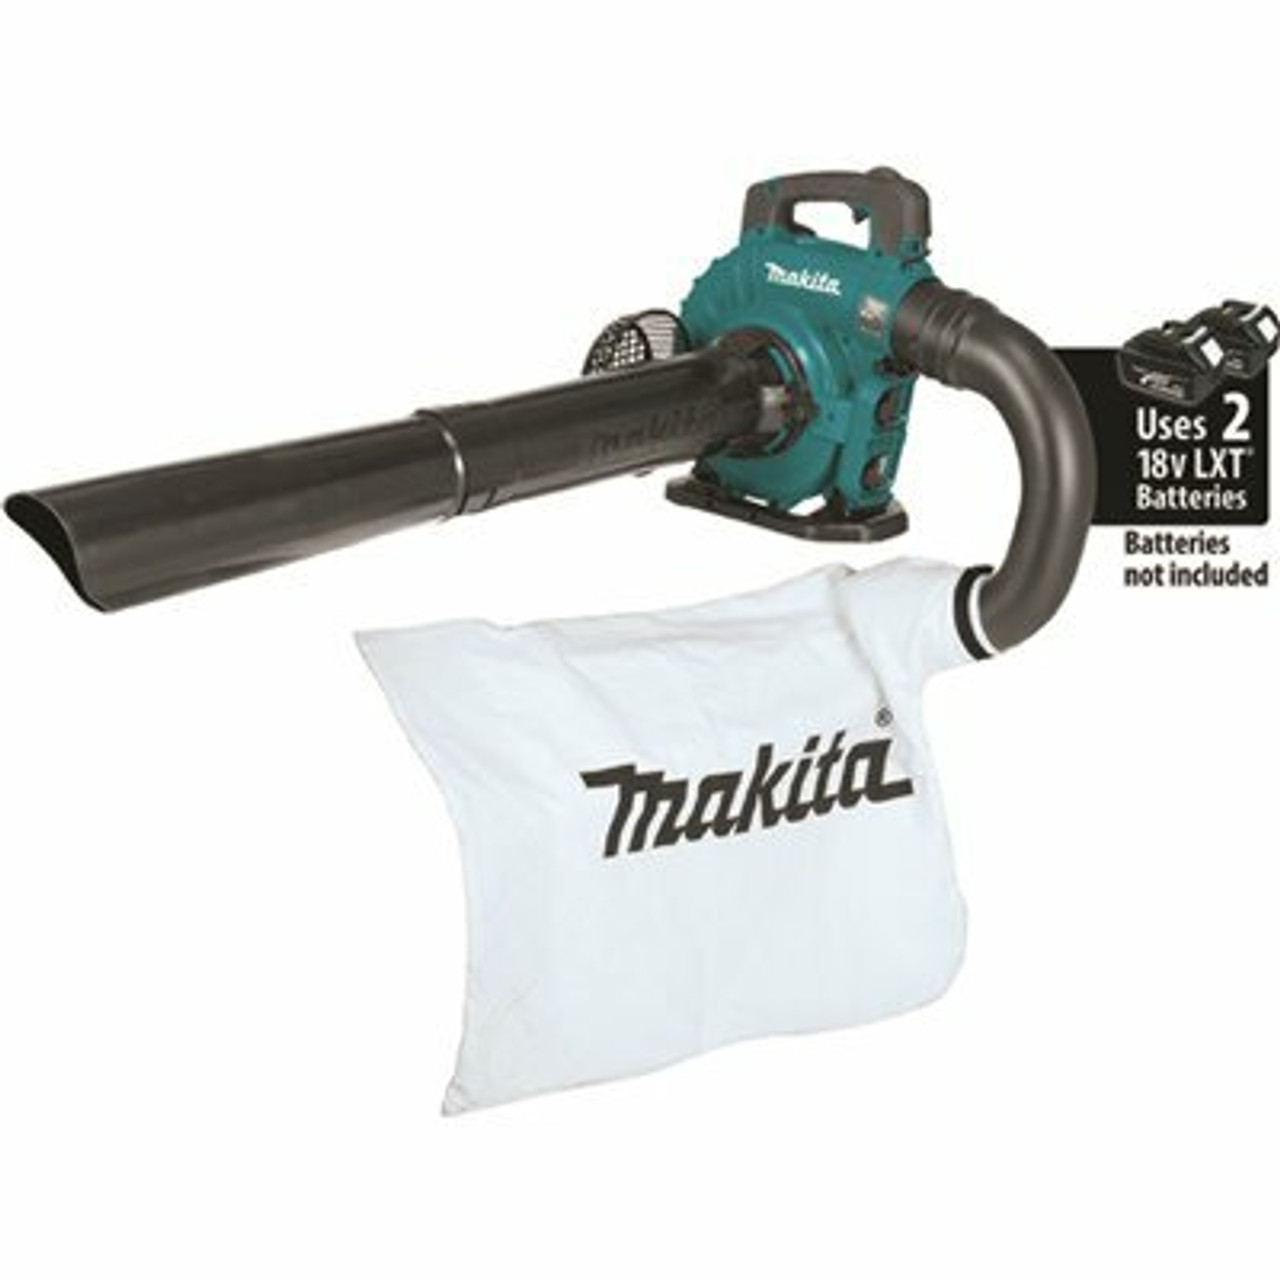 Makita 120 Mph 473 Cfm 18V X2 (36V) Lxt Lithium-Ion Brushless Cordless Blower With Vacuum Attachment Kit (Tool-Only)